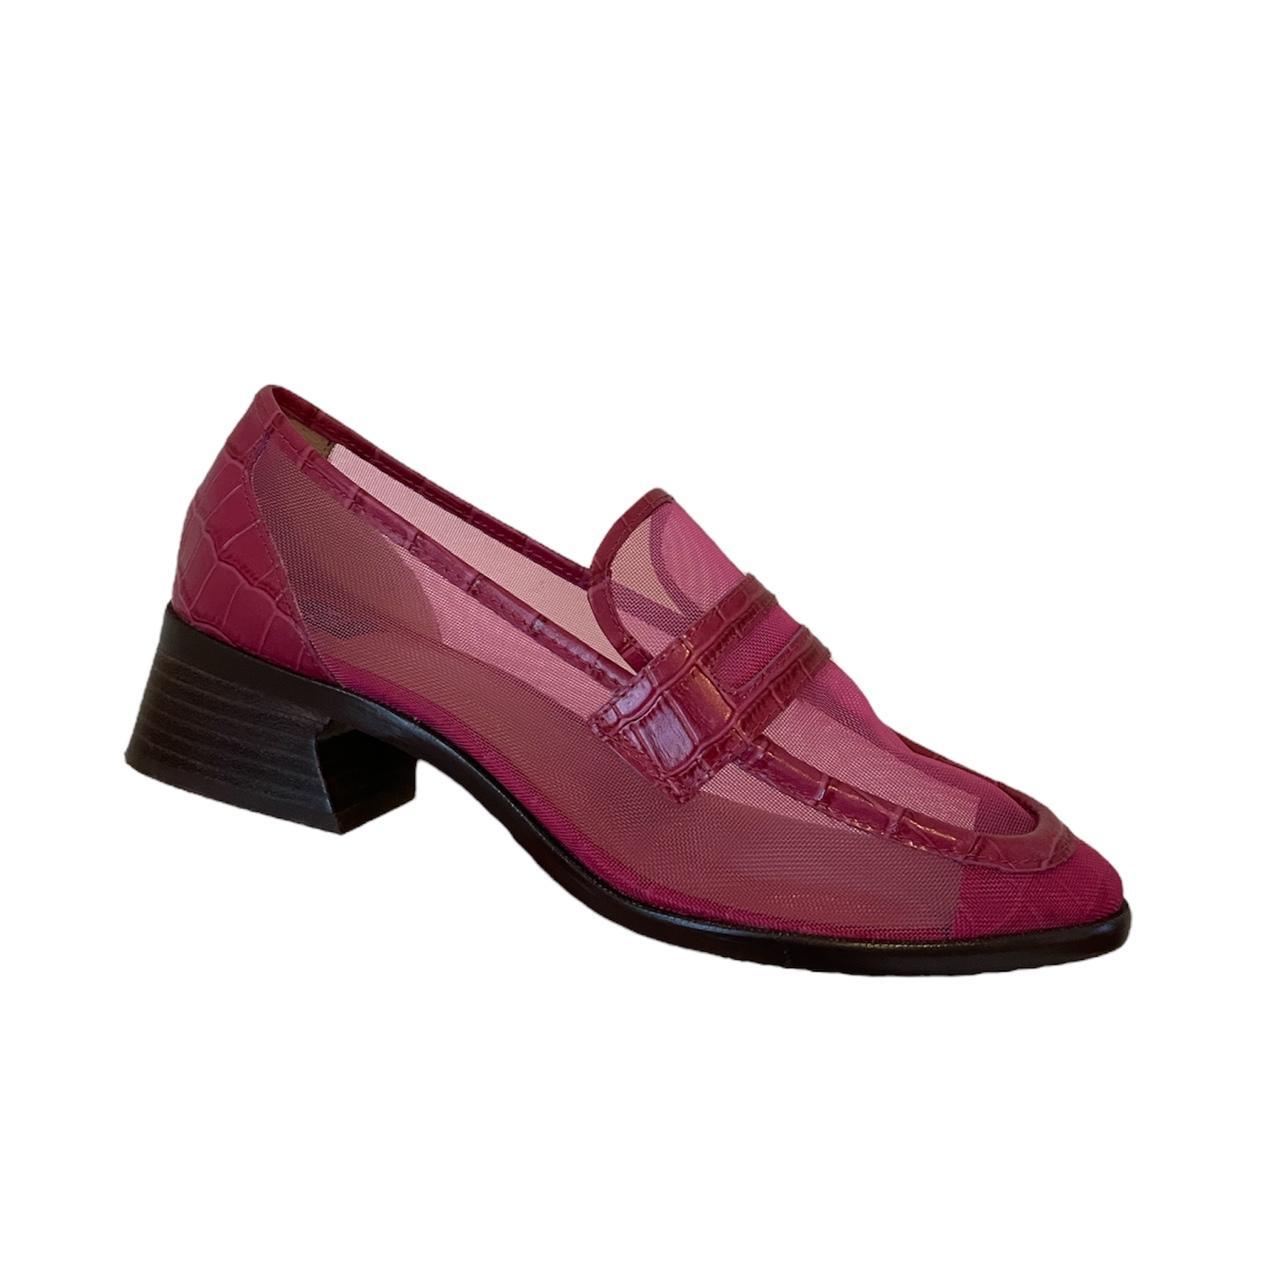 Zac Posen Women's Pink and Brown Loafers